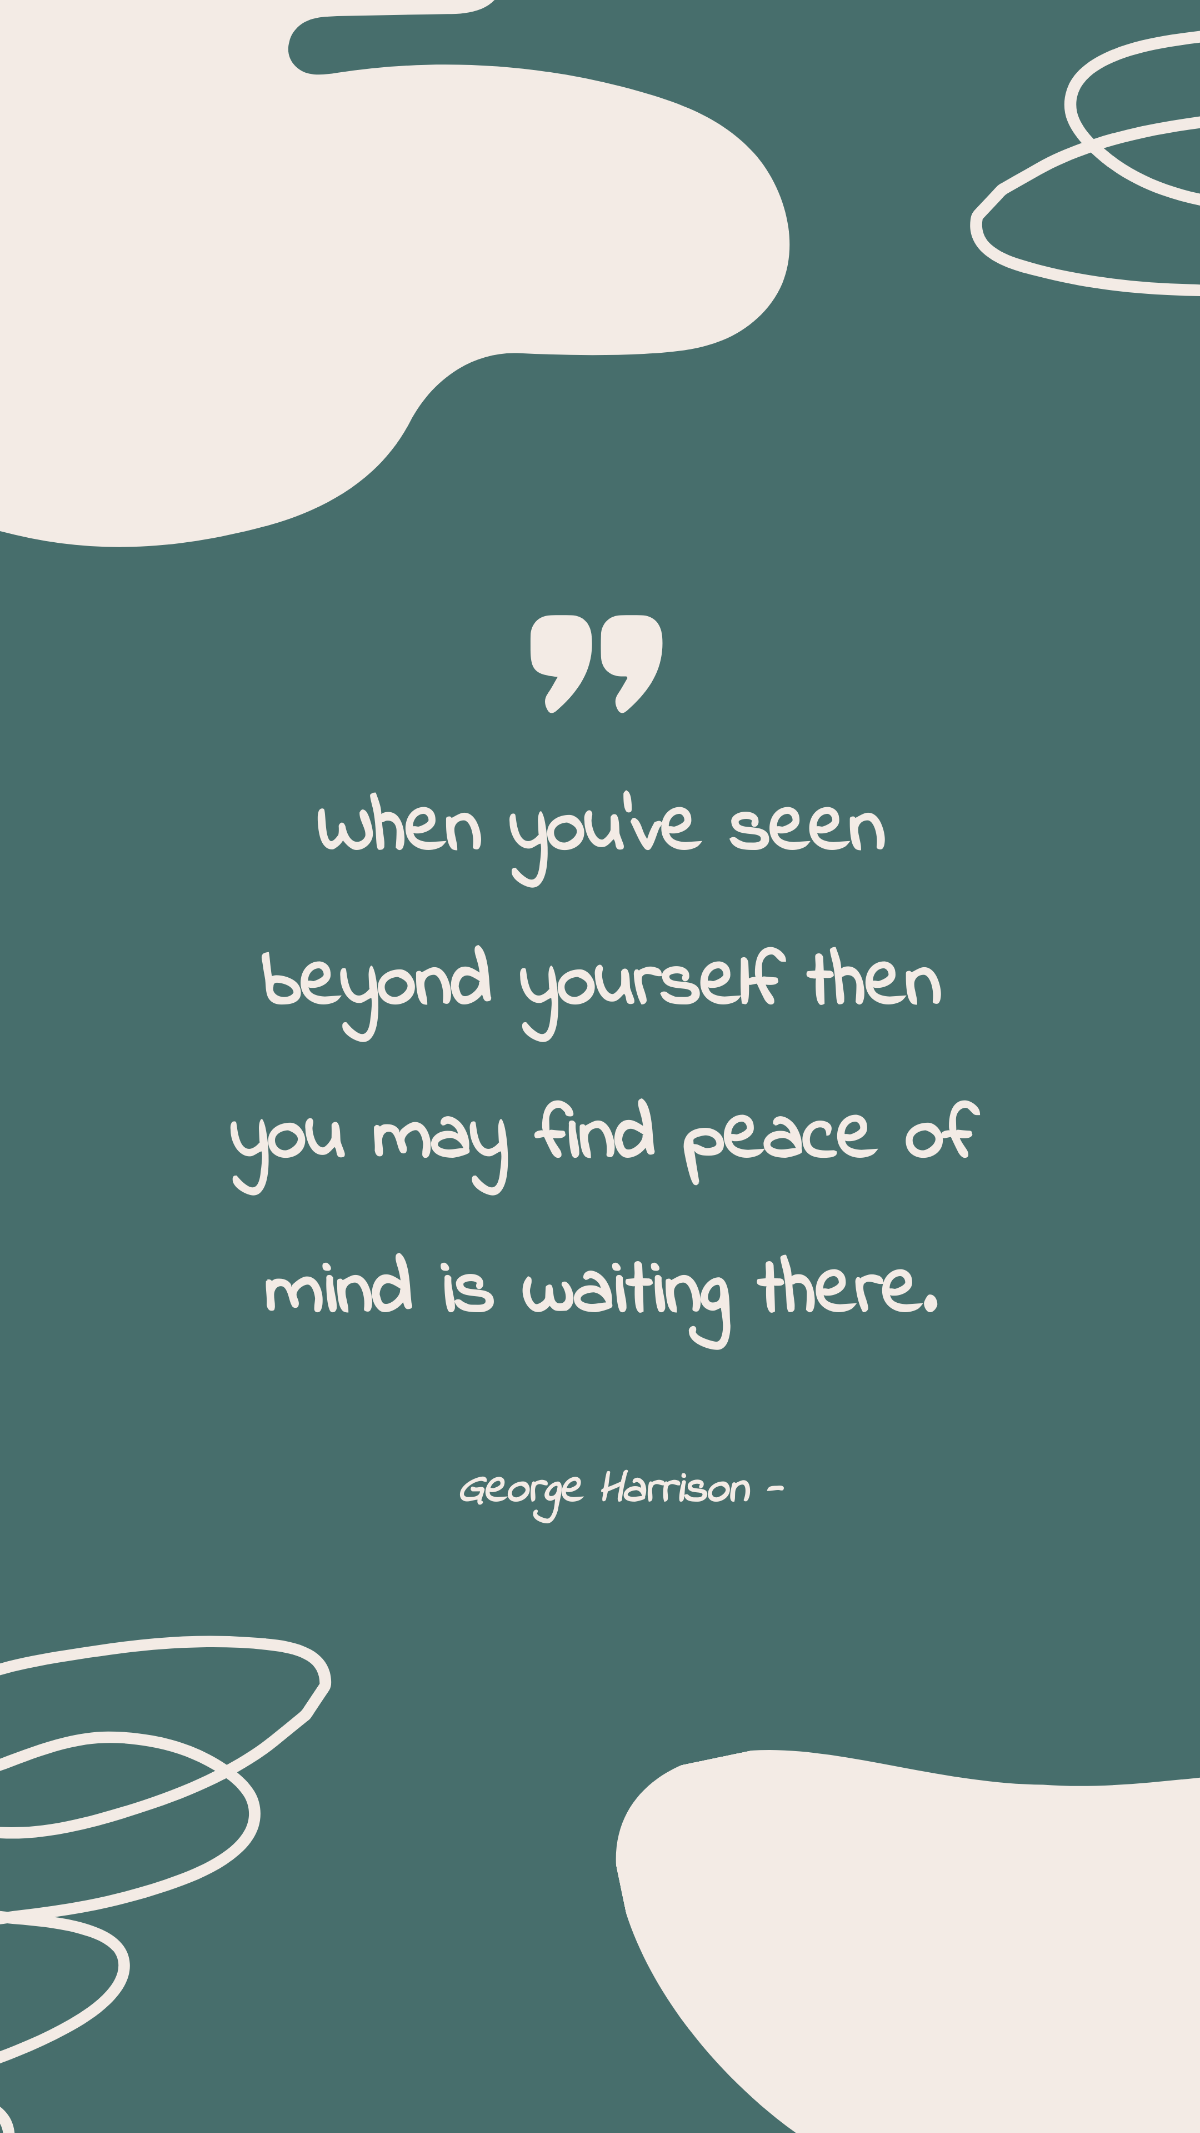 George Harrison - When you’ve seen beyond yourself then you may find peace of mind is waiting there.